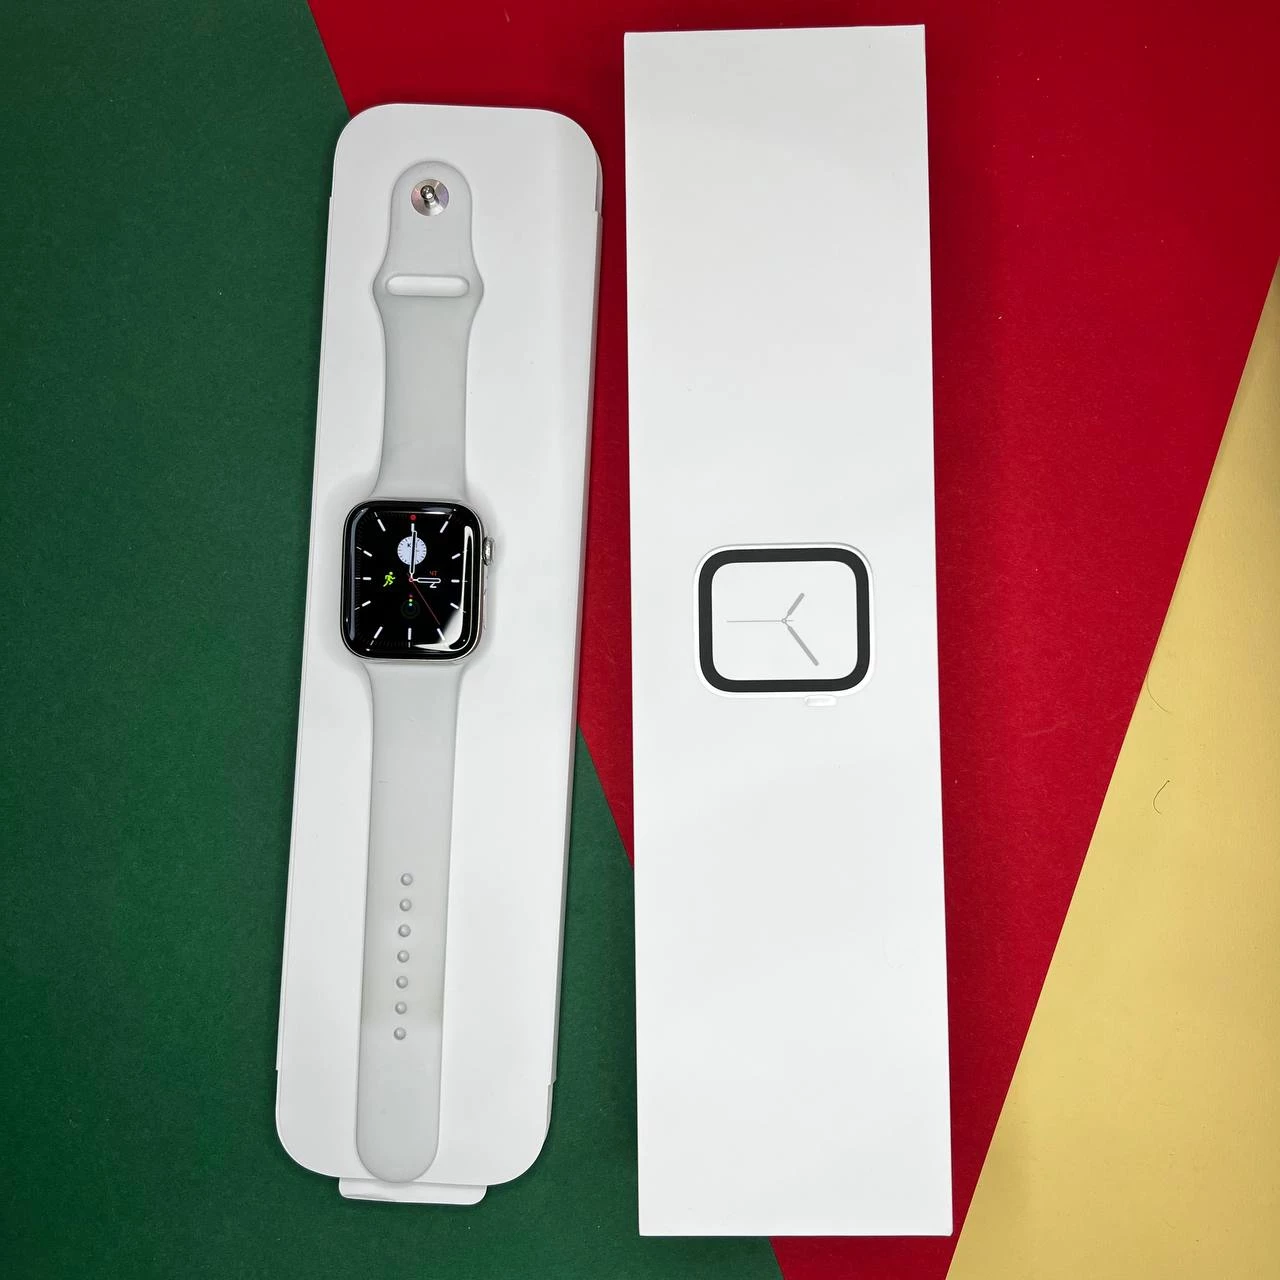 ⏰USED Apple Watch Series 4 (GPS + Cellular) 44mm Stainless Steel Case with White Sport Band (MTV22, MTX02),🔋91%(Состояние - 9/10, комплект полный, гарантия - 1 мес.)